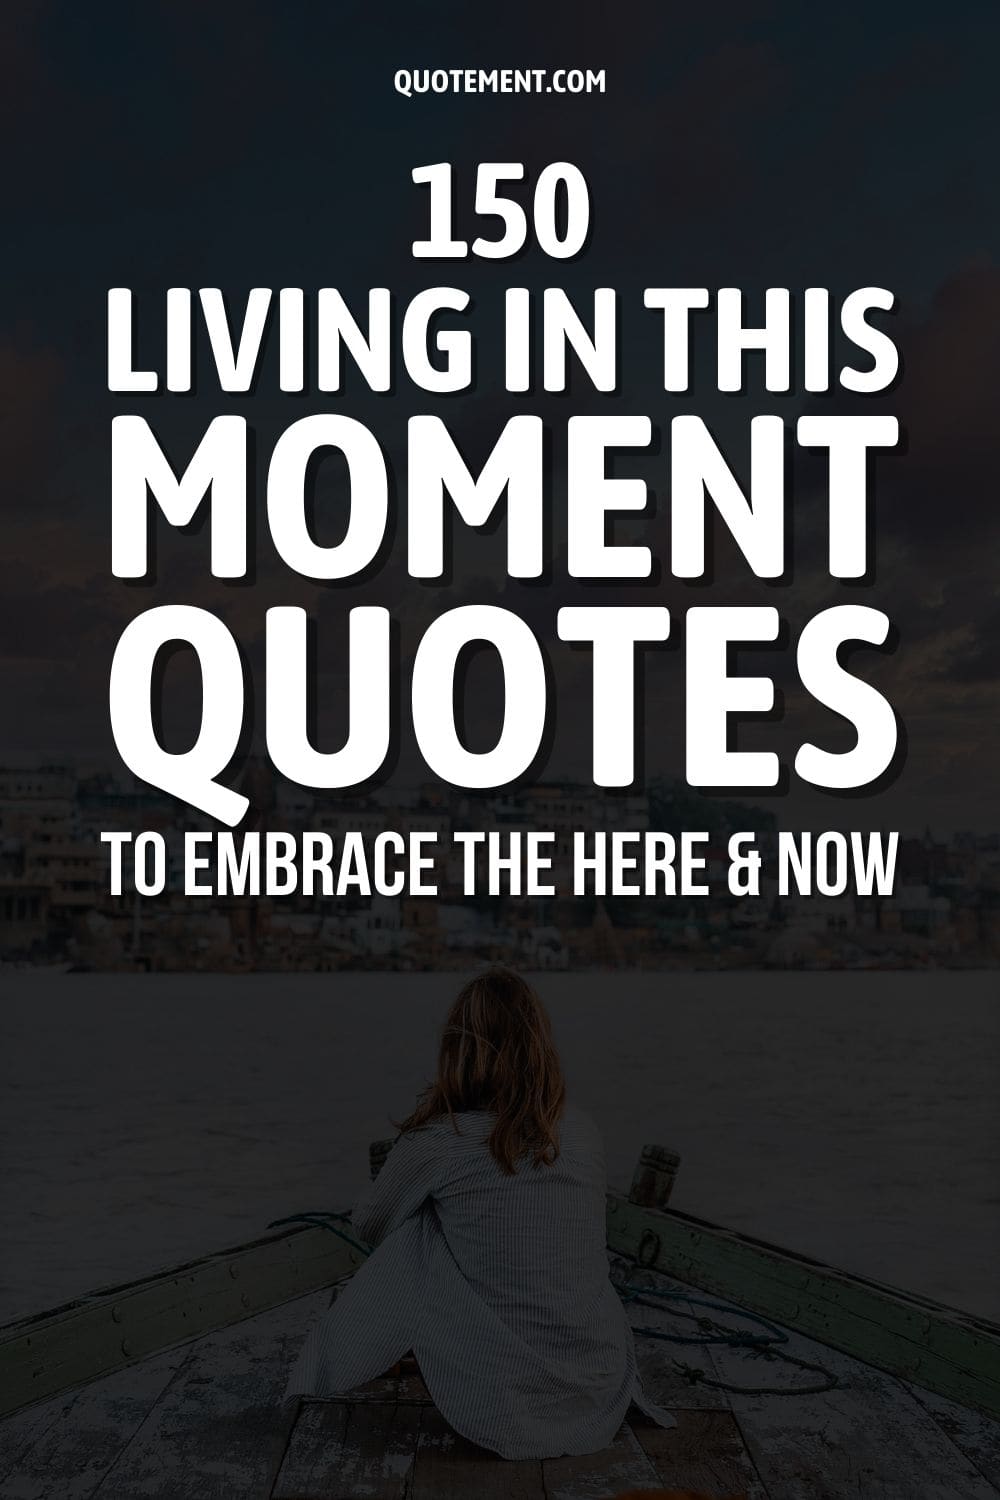 150 Living In This Moment Quotes To Embrace The Here & Now
